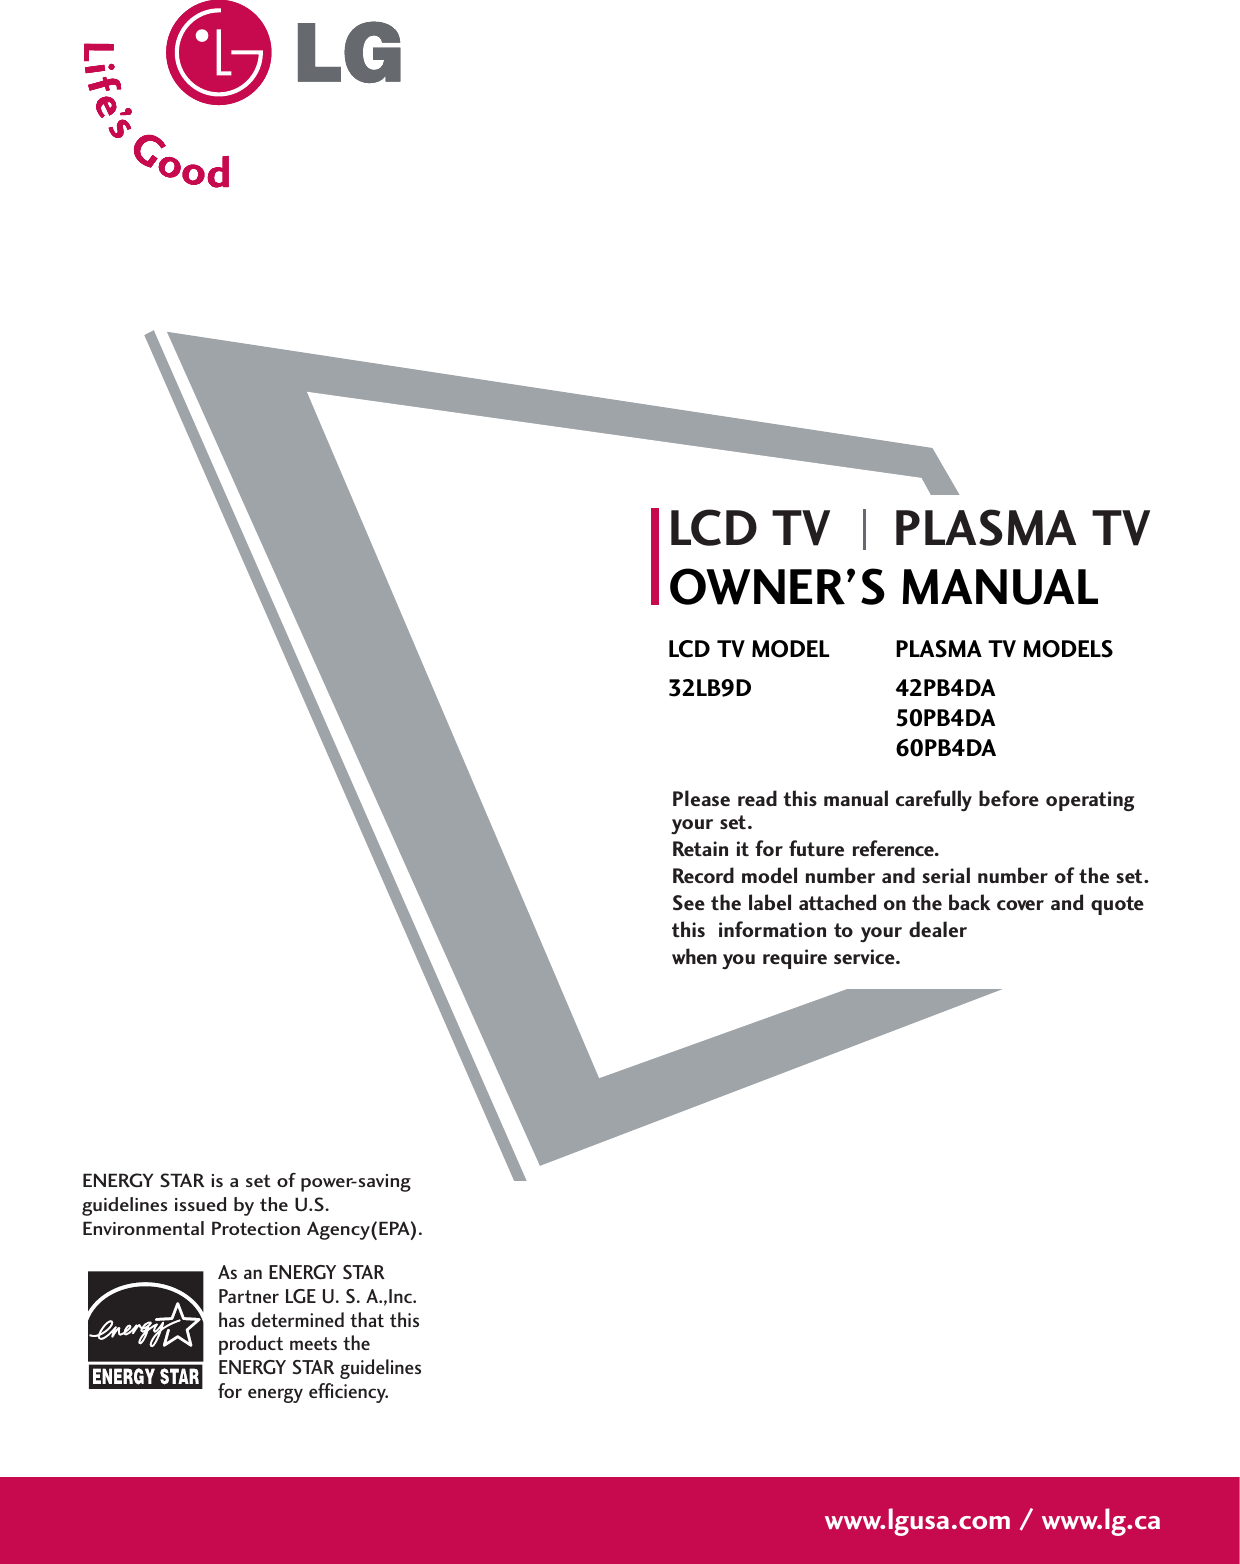 Please read this manual carefully before operatingyour set. Retain it for future reference.Record model number and serial number of the set. See the label attached on the back cover and quote this  information to your dealer when you require service.LCD TV PLASMA TVOWNER’S MANUALLCD TV MODEL32LB9DPLASMA TV MODELS42PB4DA50PB4DA60PB4DAwww.lgusa.com / www.lg.caAs an ENERGY STARPartner LGE U. S. A.,Inc.has determined that thisproduct meets theENERGY STAR guidelinesfor energy efficiency.ENERGY STAR is a set of power-savingguidelines issued by the U.S.Environmental Protection Agency(EPA).